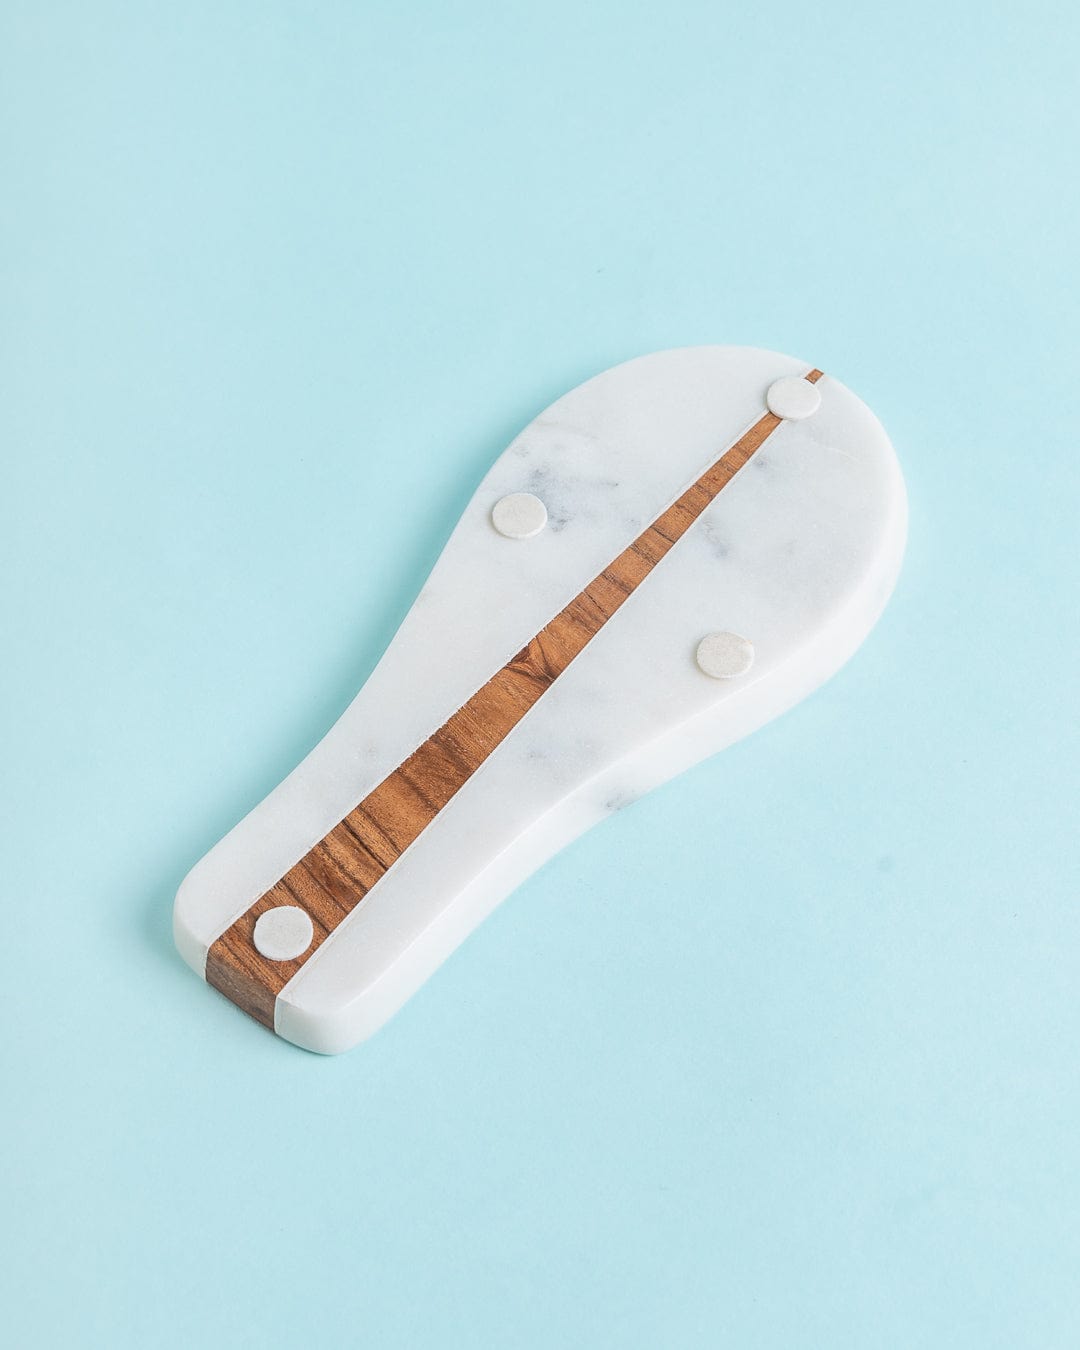 Marble & Inlay Wood Spoon rest